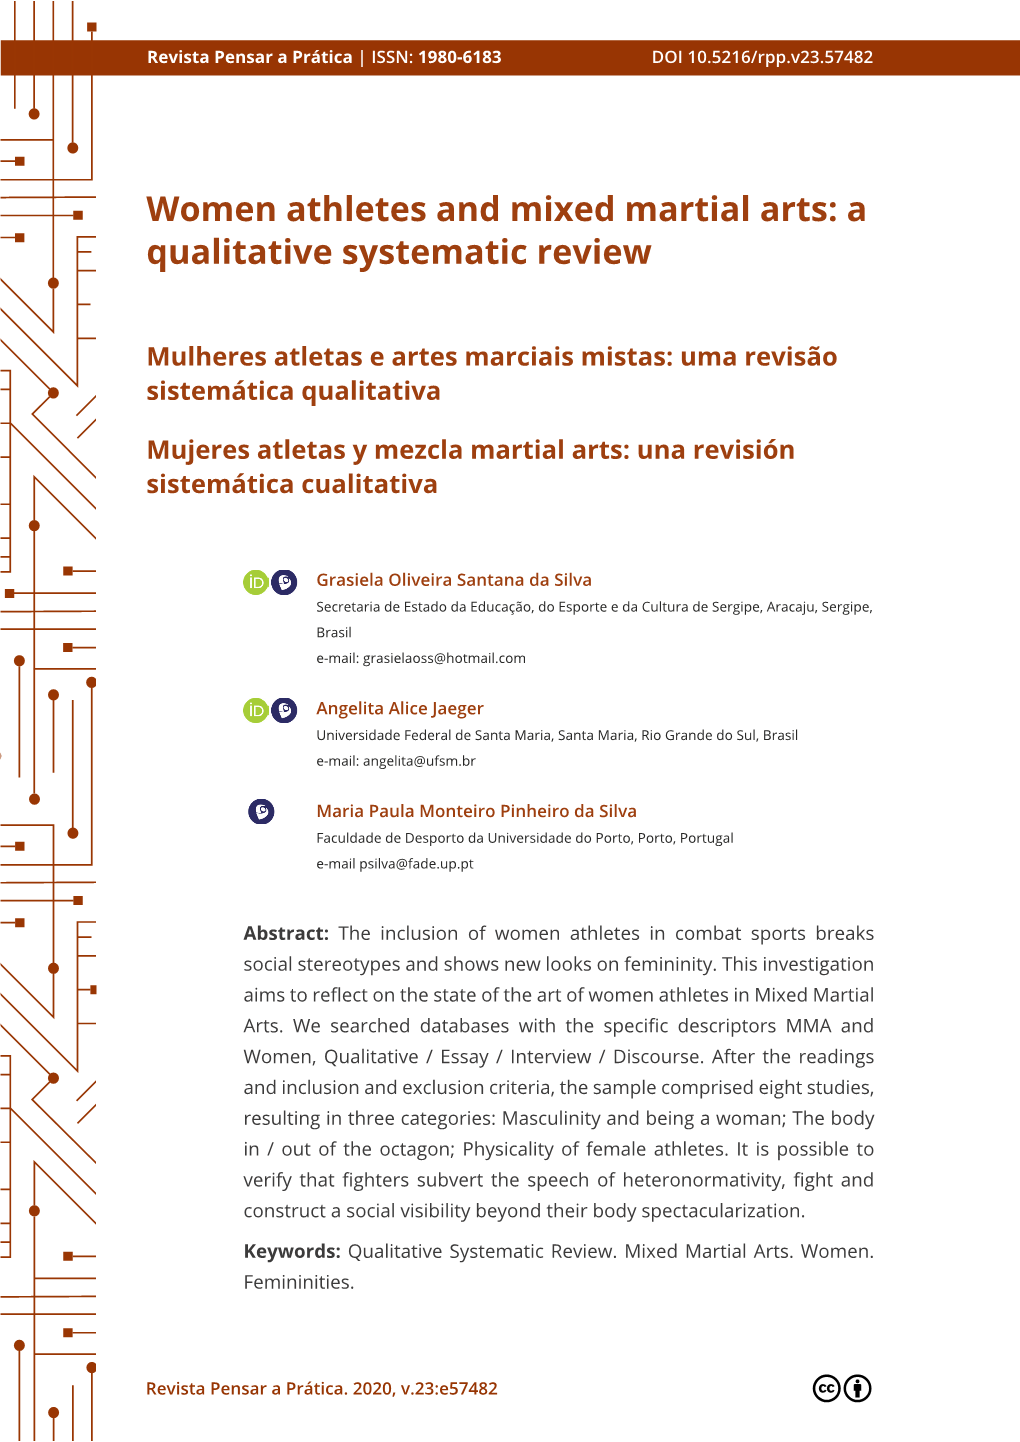 Women Athletes and Mixed Martial Arts: a Qualitative Systematic Review